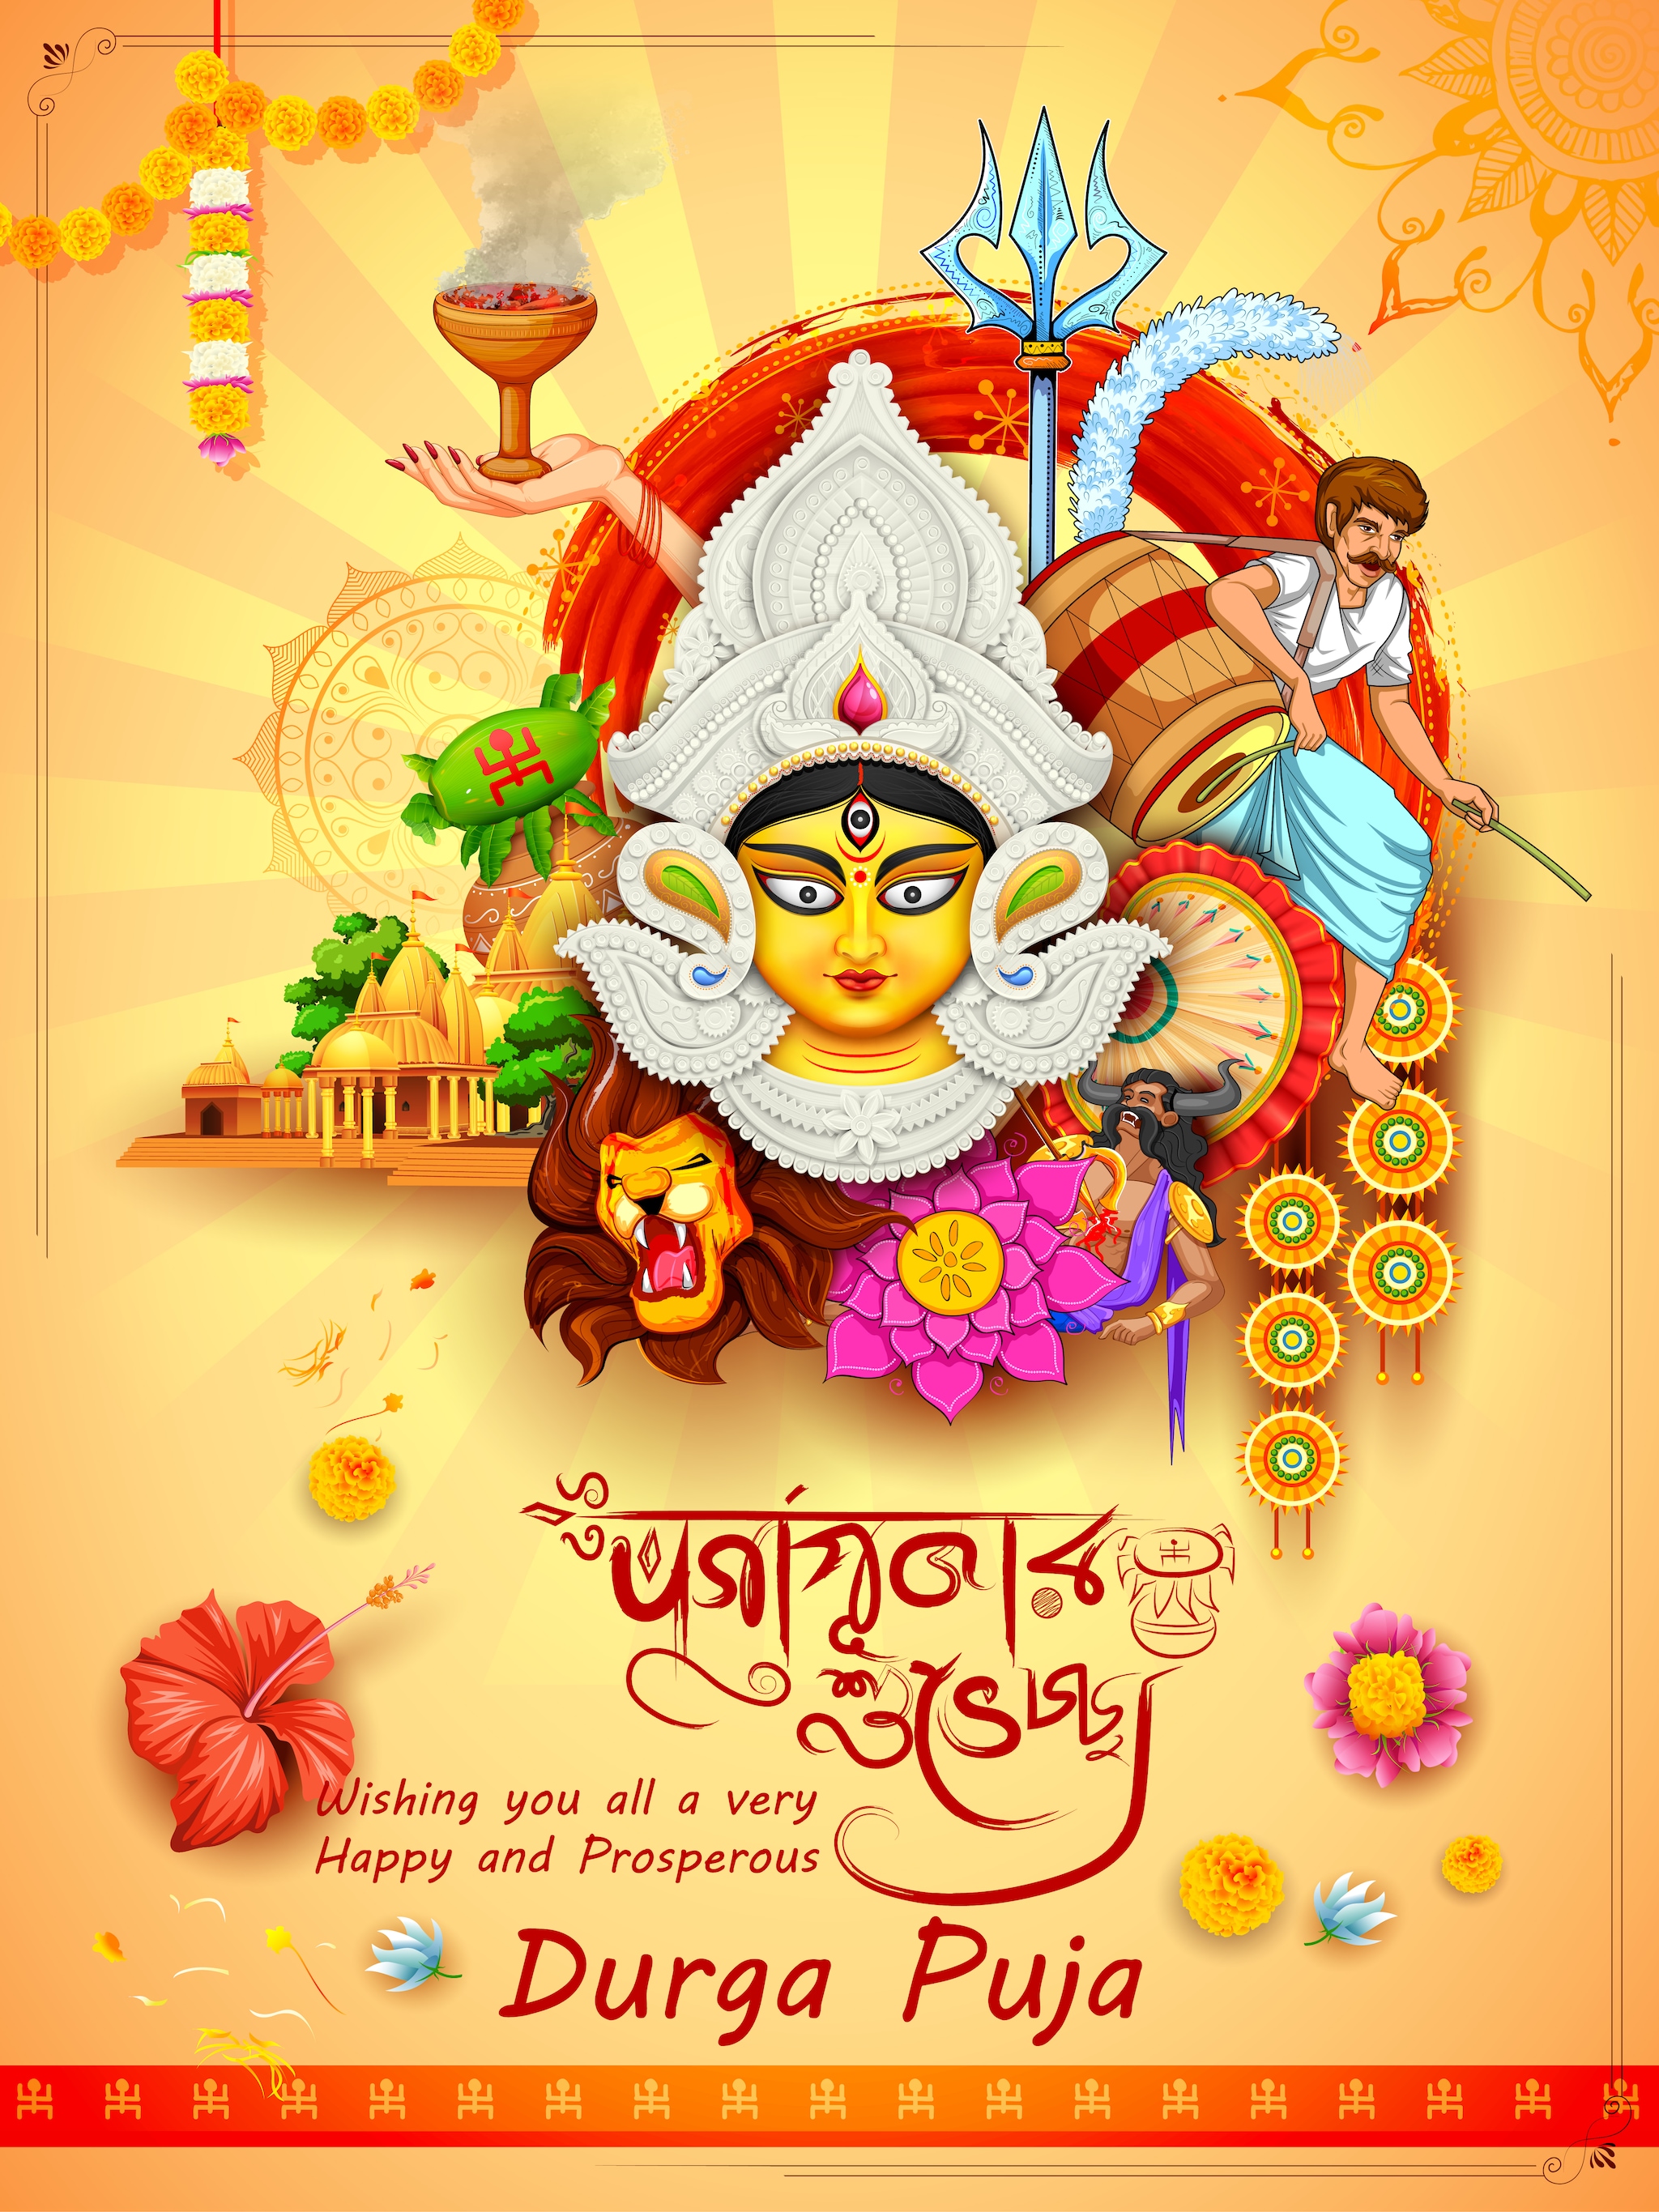 Happy Durga Puja 2022 Wallpaper, Wishes Images, Quotes, Status, Photos, Pics, SMS and Messages to share. (Image: Shutterstock)